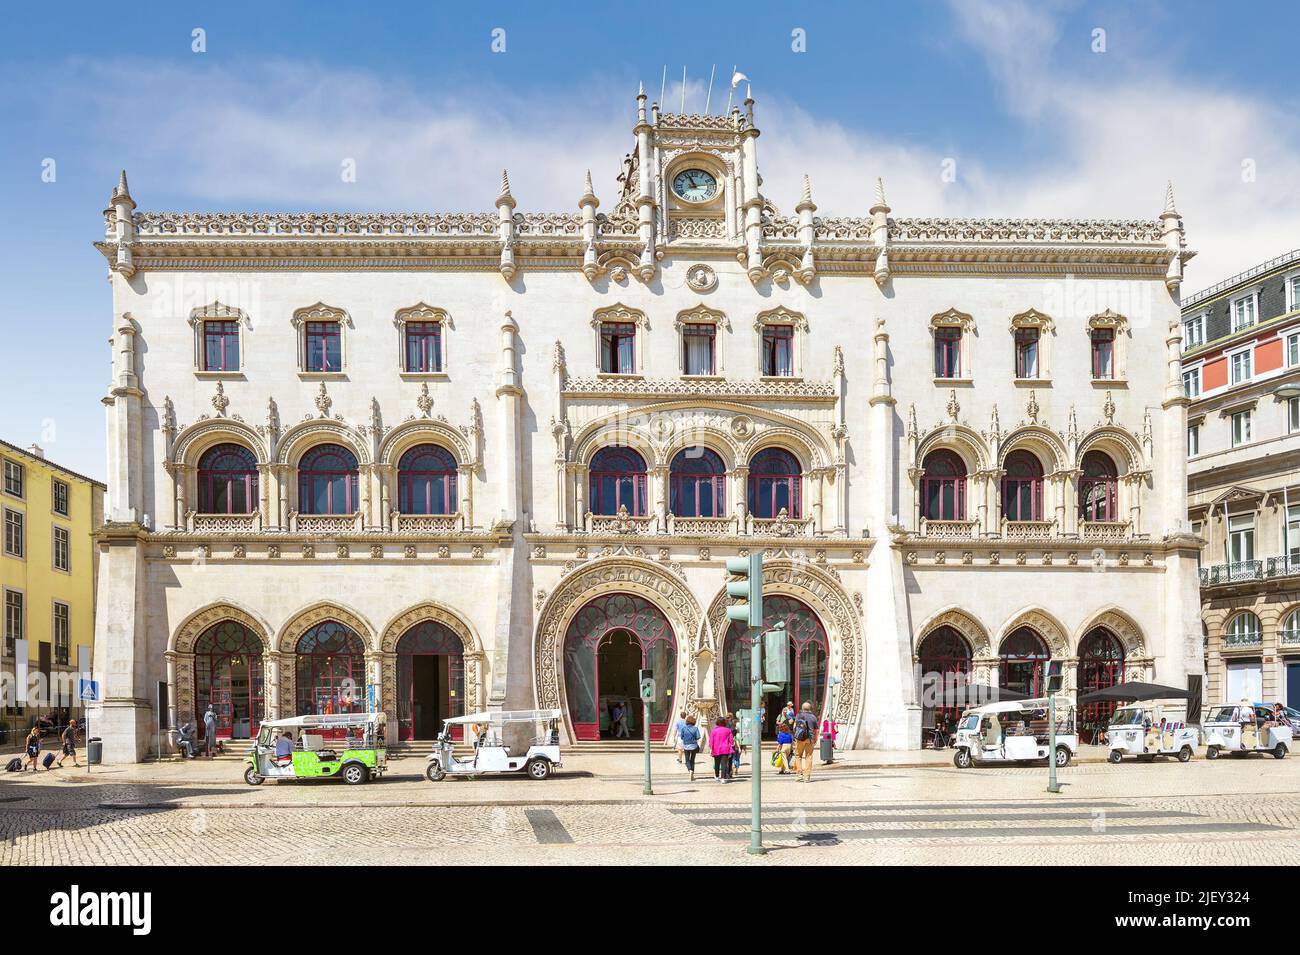 Rossio Railway Station in Lisbon. Portugal Stock Photo